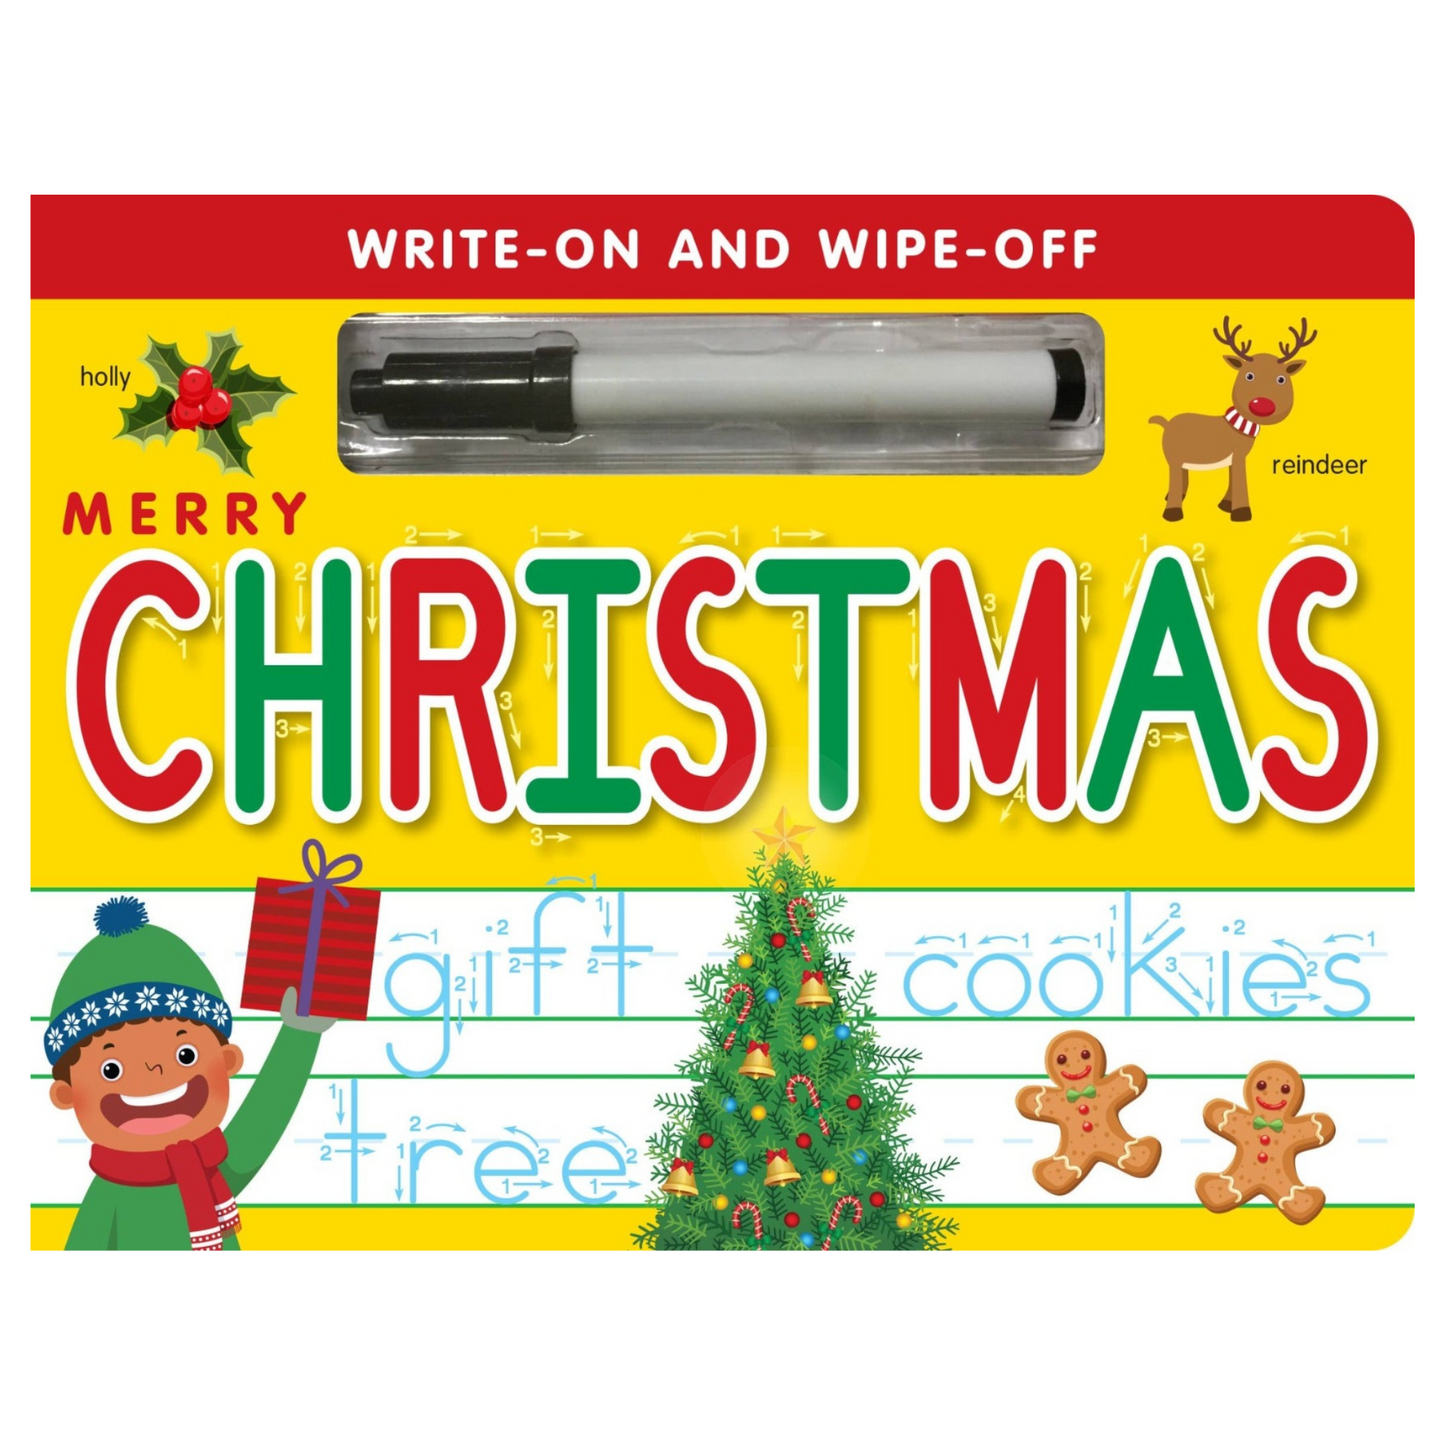 Merry Christmas Write-On and Wipe-Off